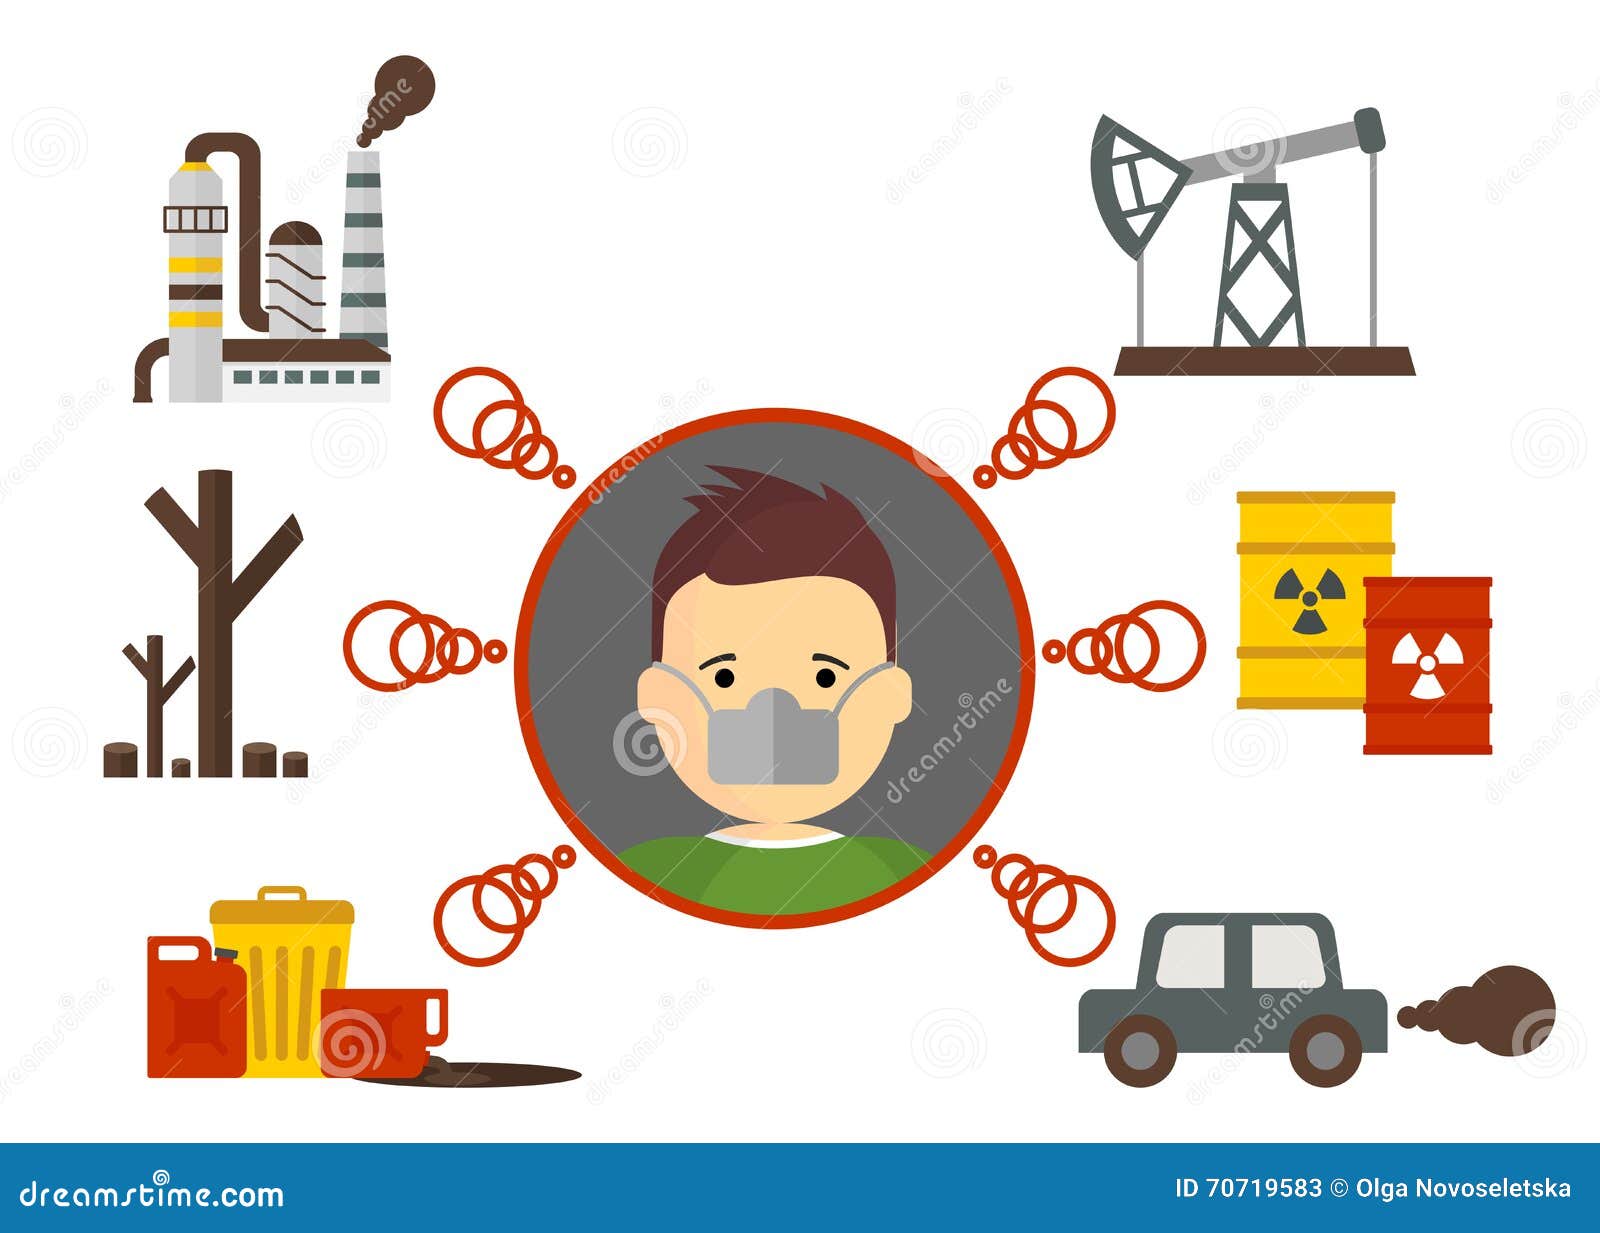 Causes of air pollution stock vector. Illustration of design - 70719583